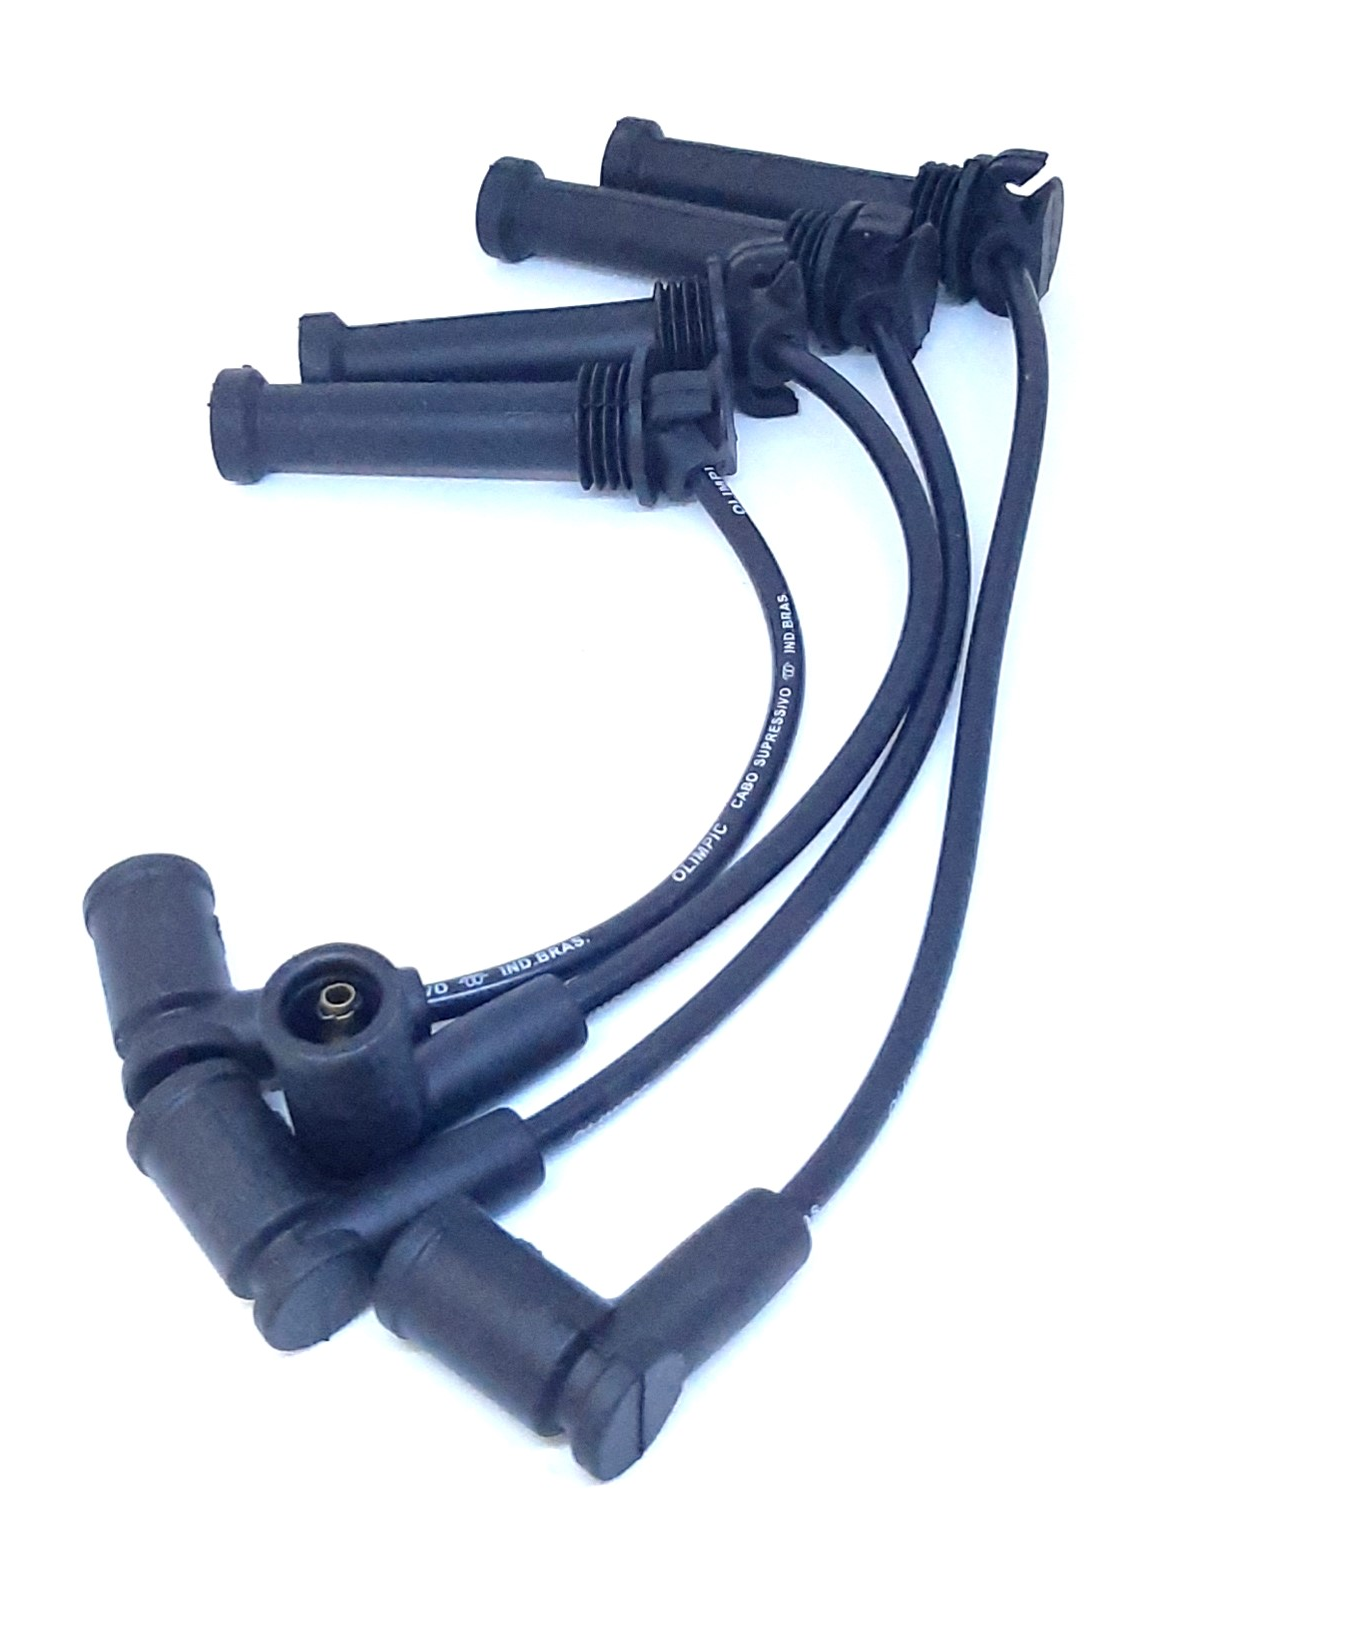 Cables Bujias Ford Ranger 2.3 99-12